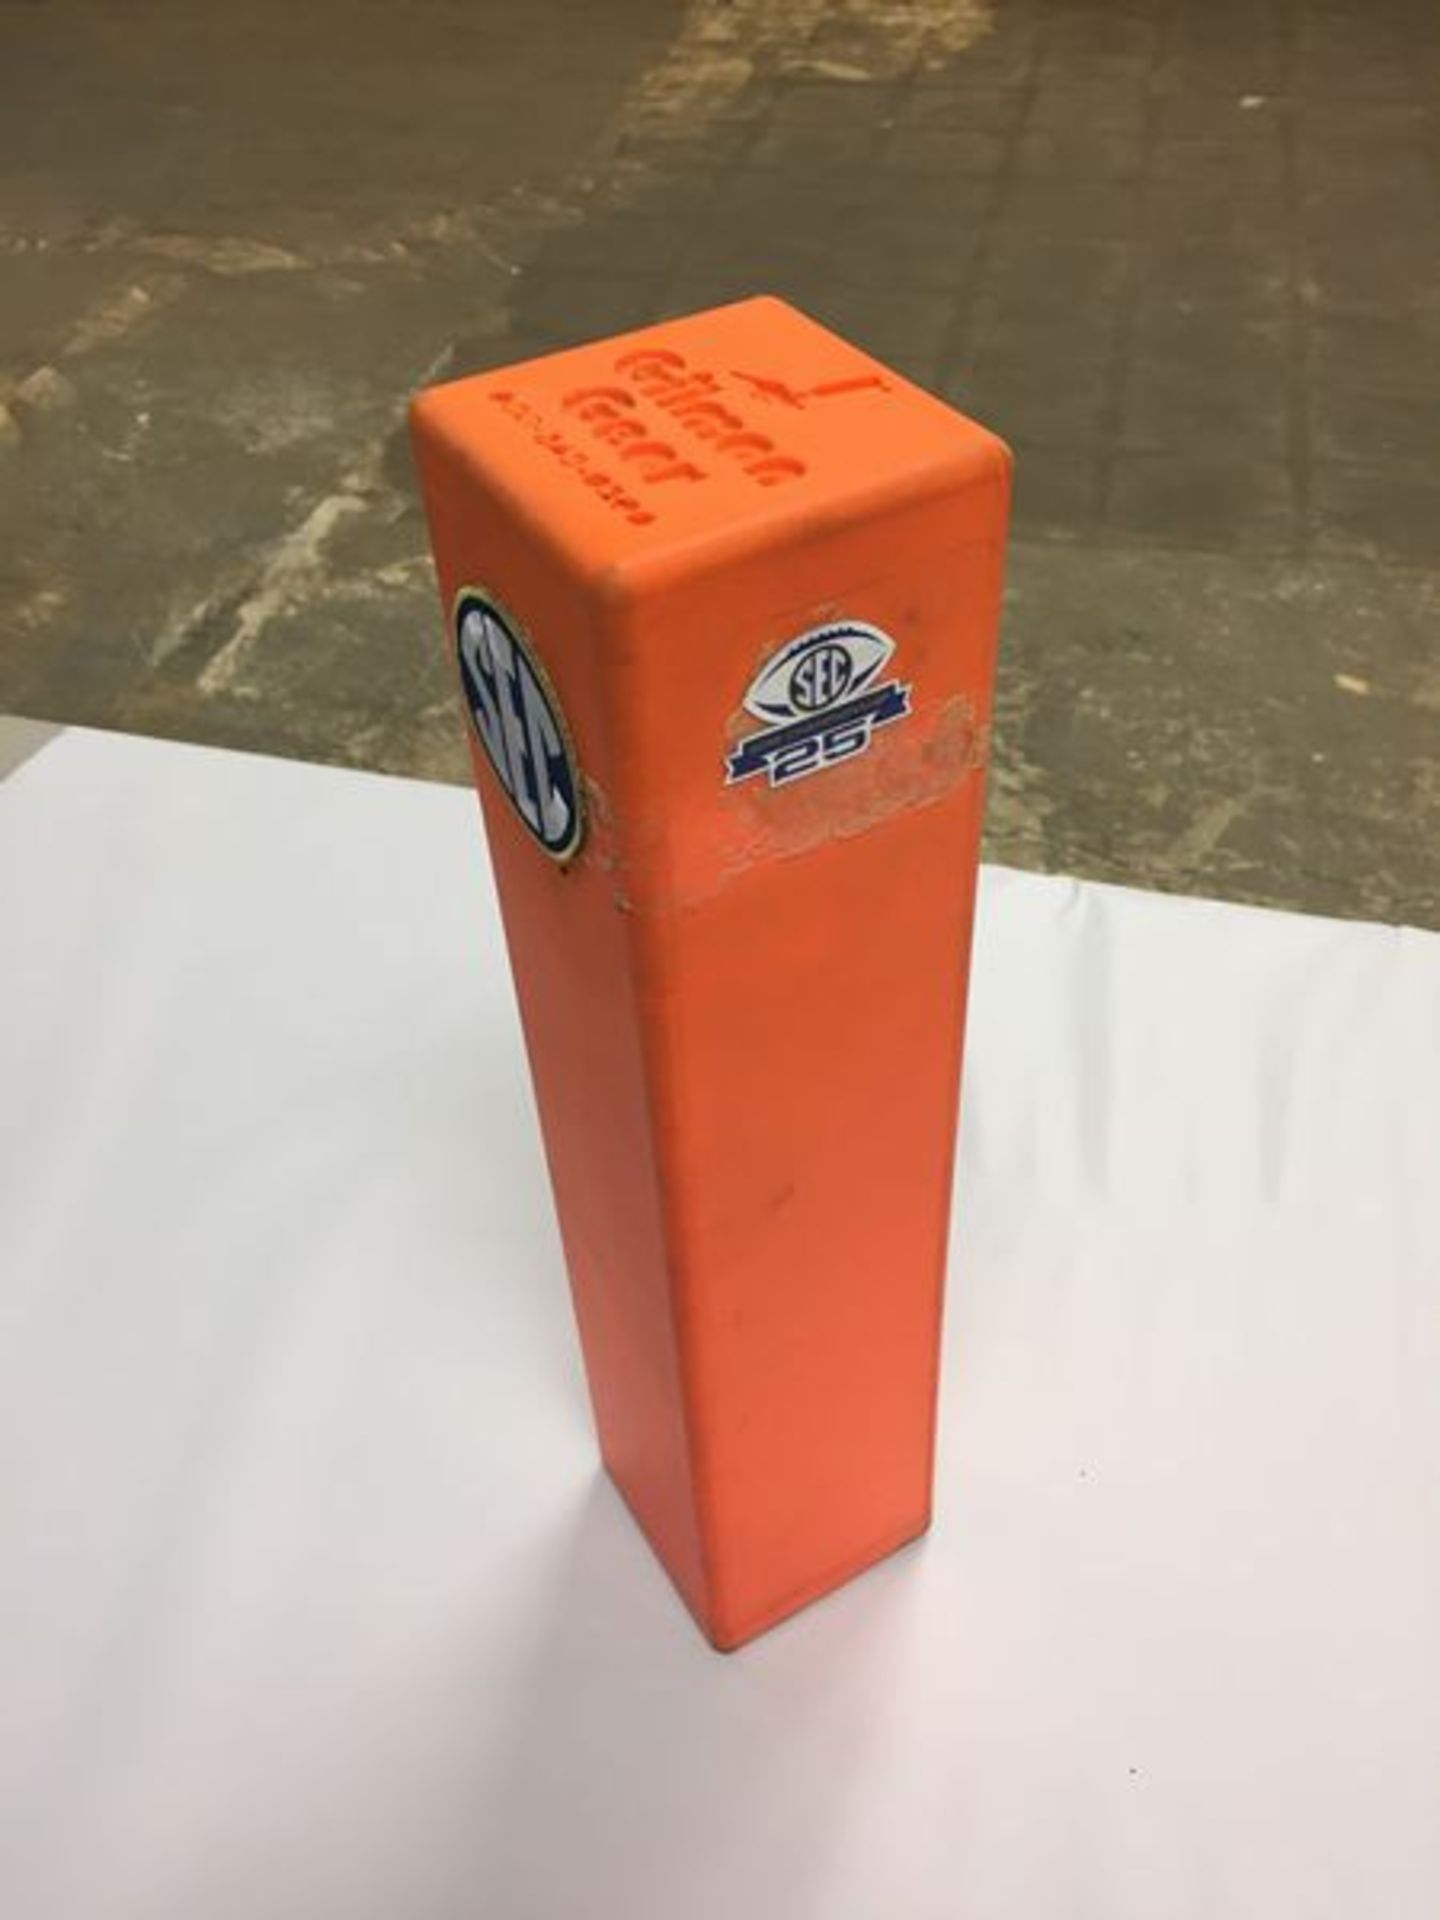 SEC"" End-Zone Pylon / Game-Used / This item includes Georgia Dome Authentication Tag